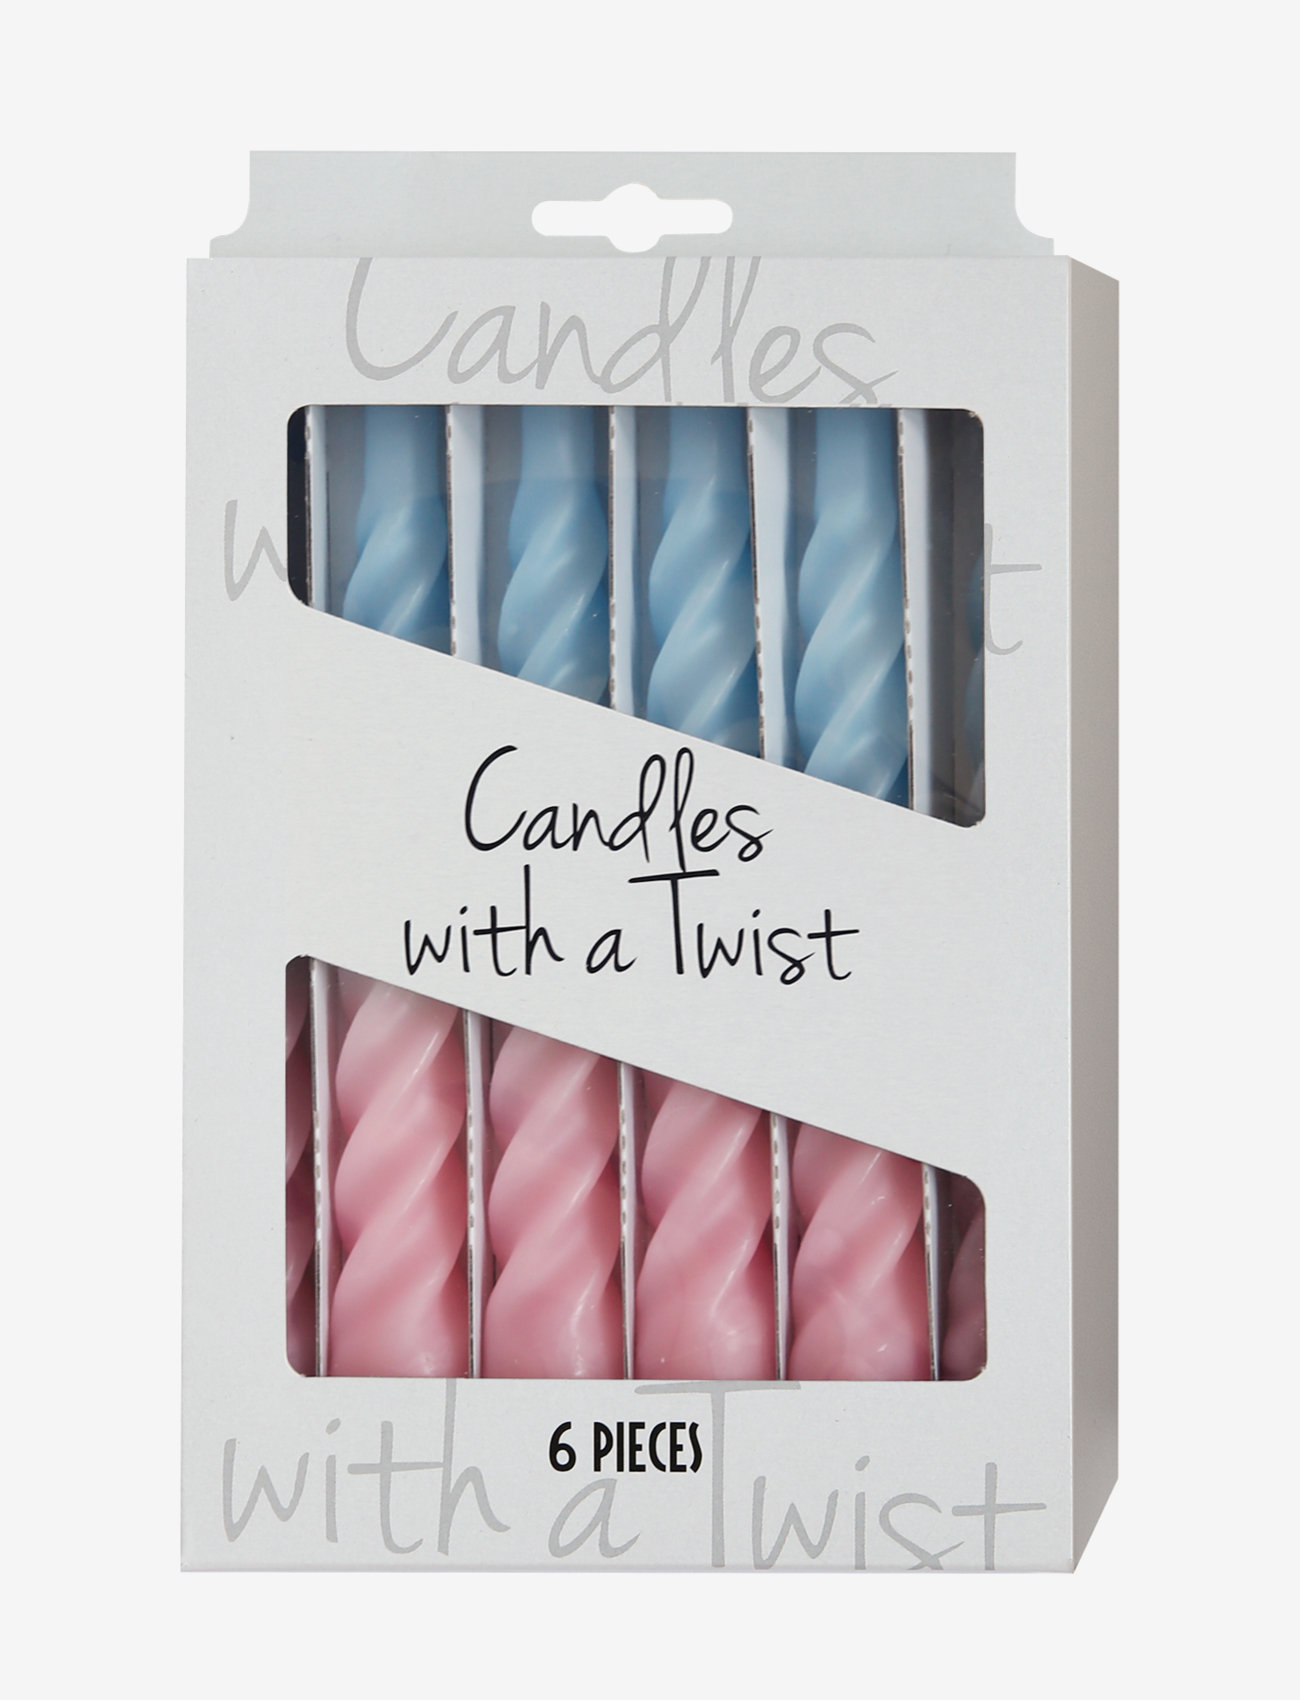 Kunstindustrien - Twisted Candles, 6 piece box, multi colored - de laveste prisene - light blue and pink with a white belt - 1